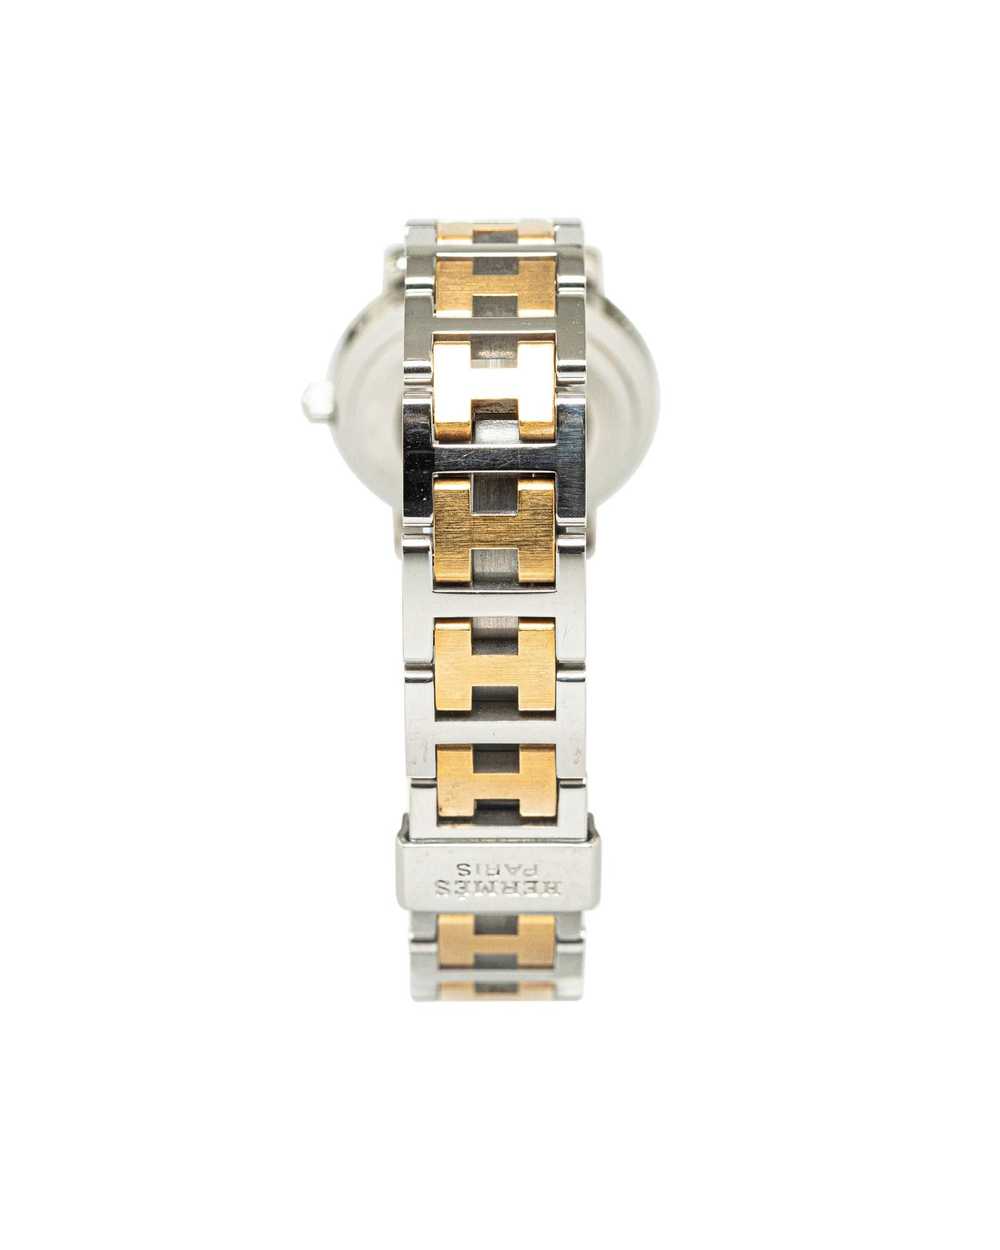 Hermes Stainless Steel Quartz Clipper Watch - image 3